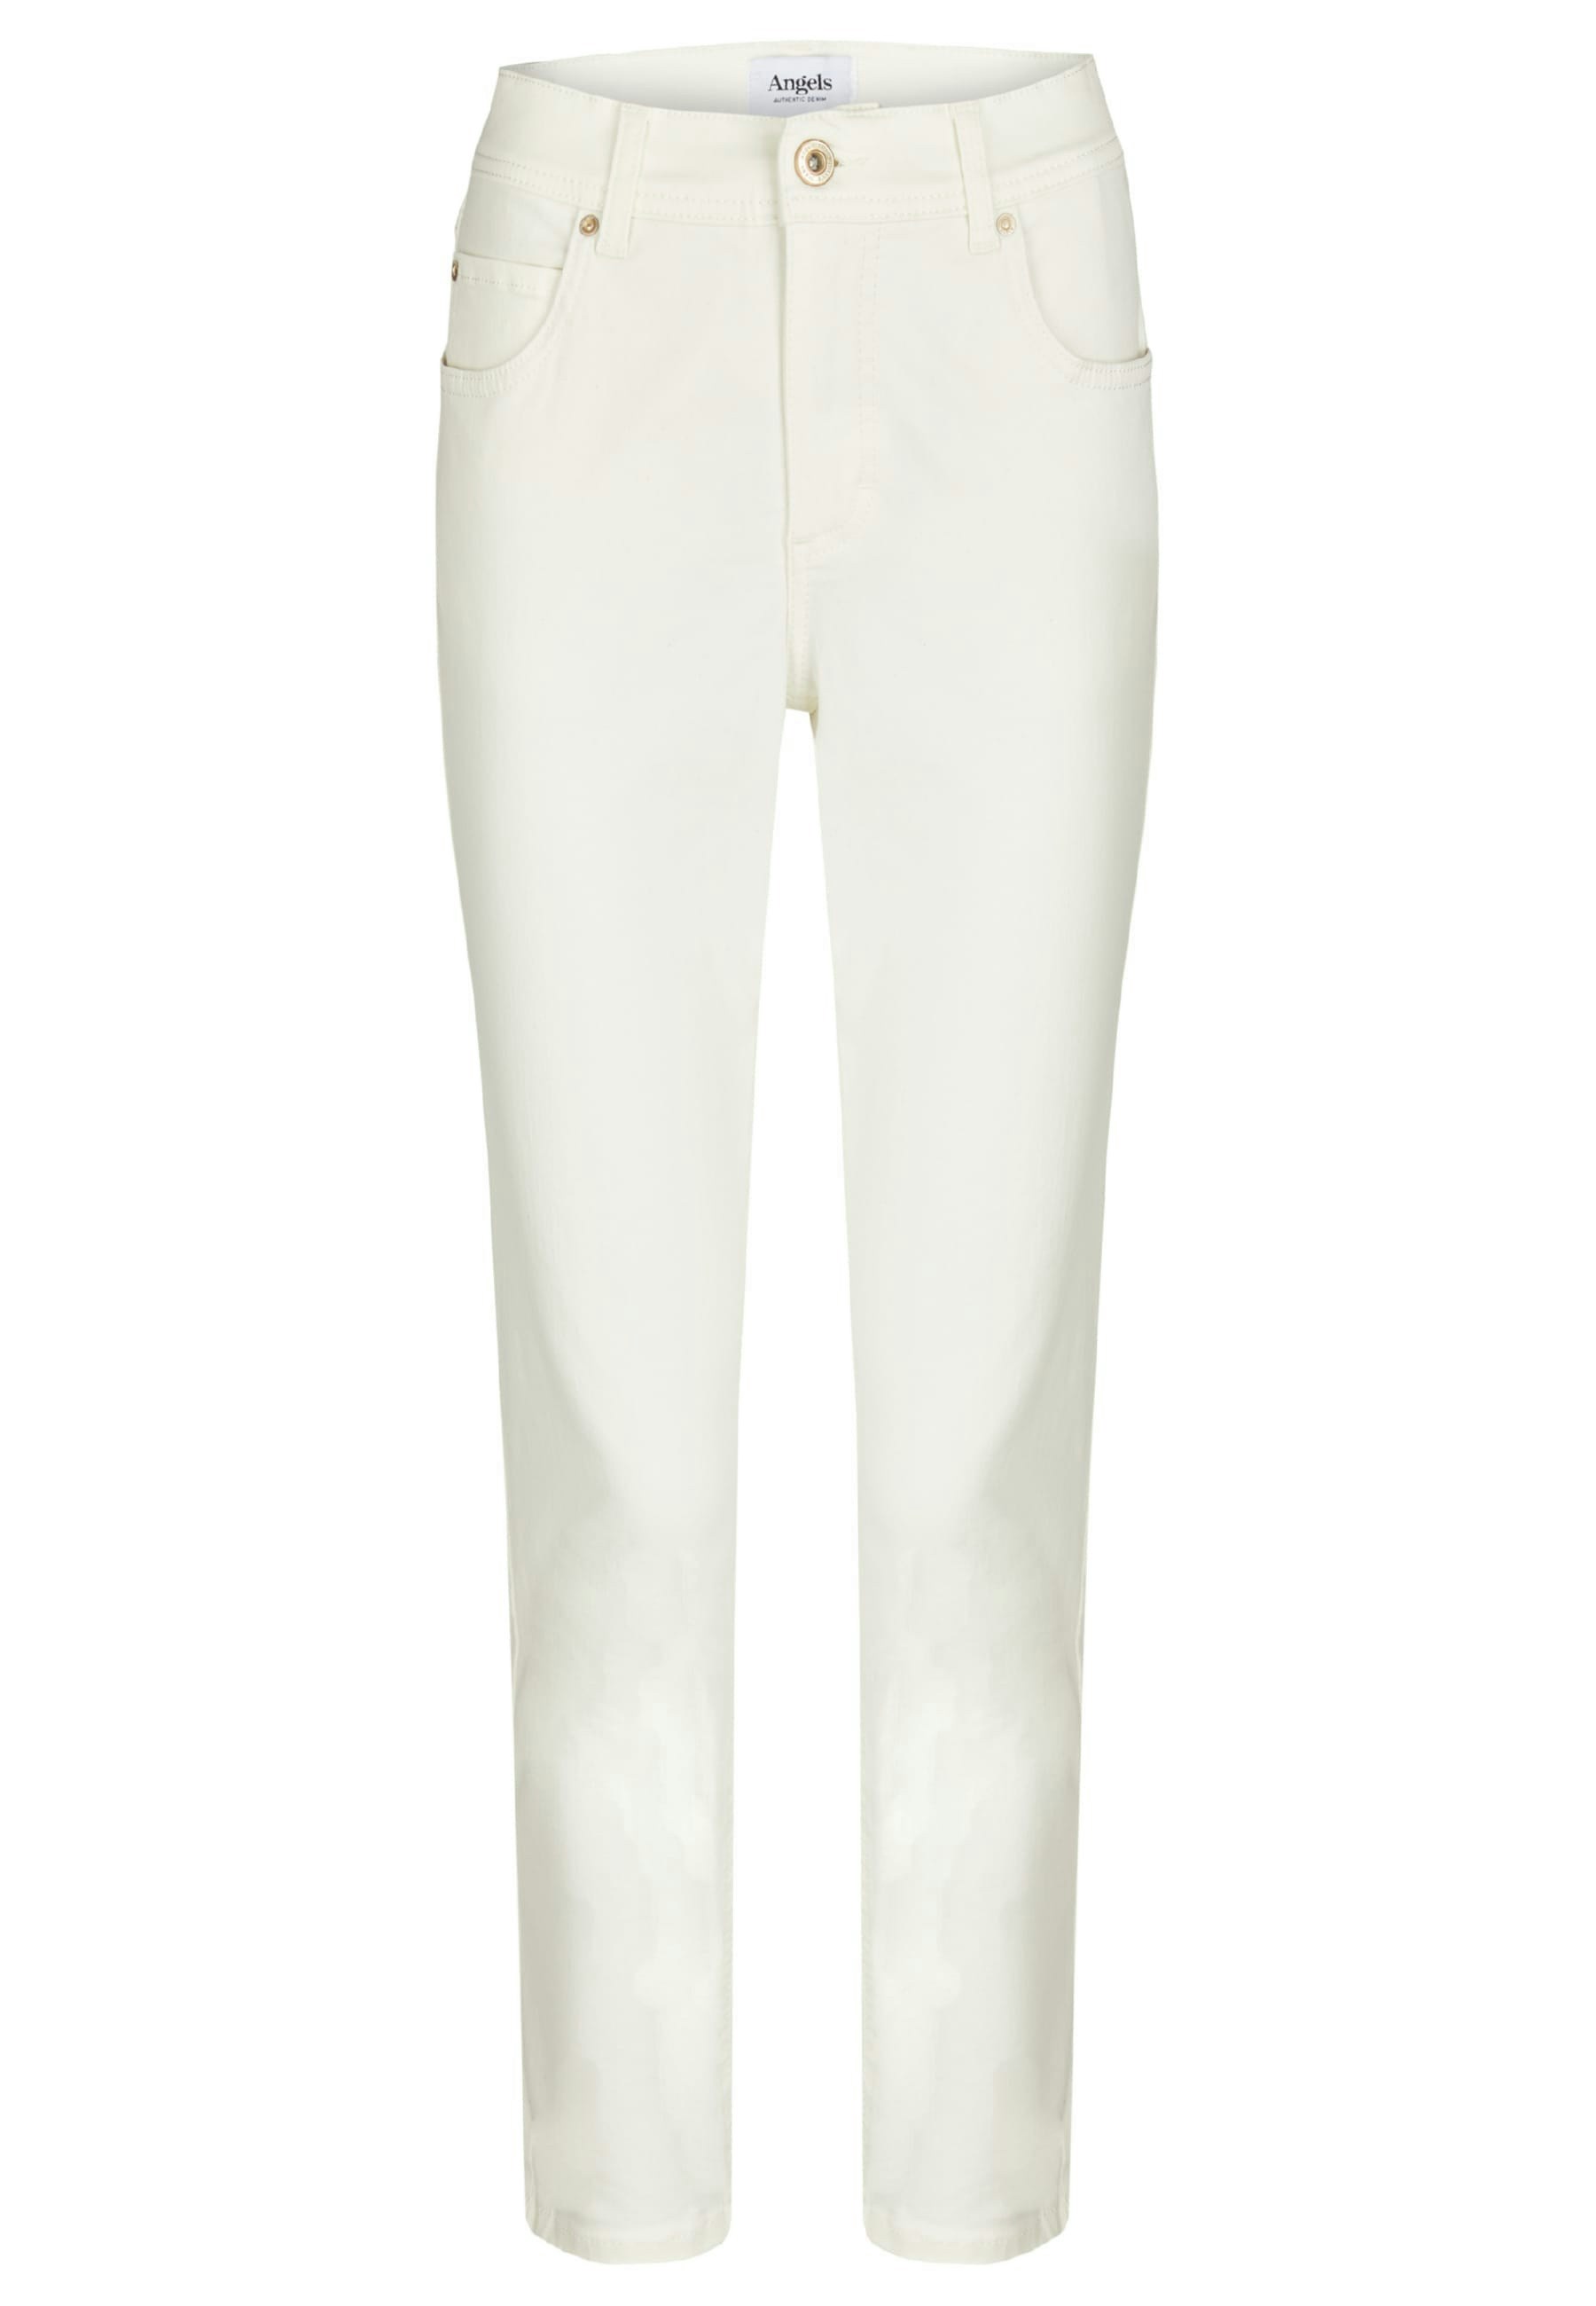 Online-Shop Angels Jeans mit | Ornella Used-Waschung